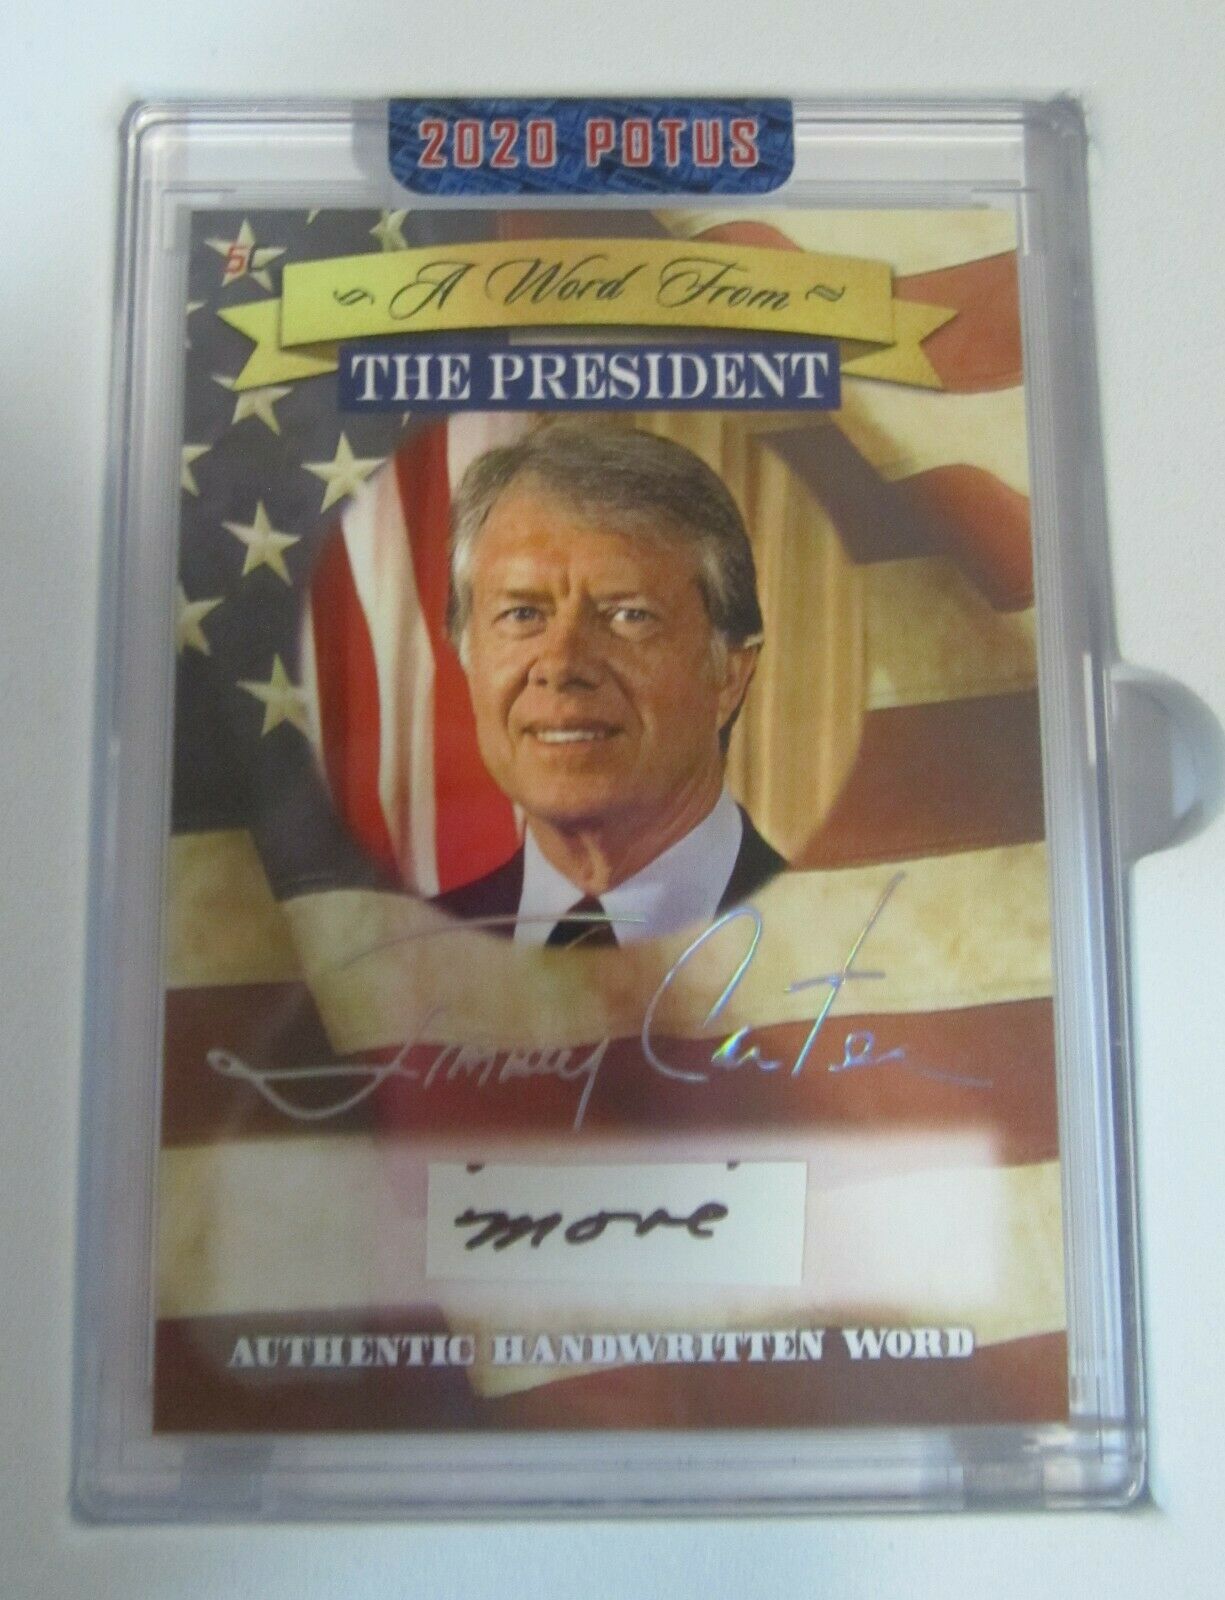 2020 Potus Jimmy Carter A Word From The President Handwritten Word Nice!!